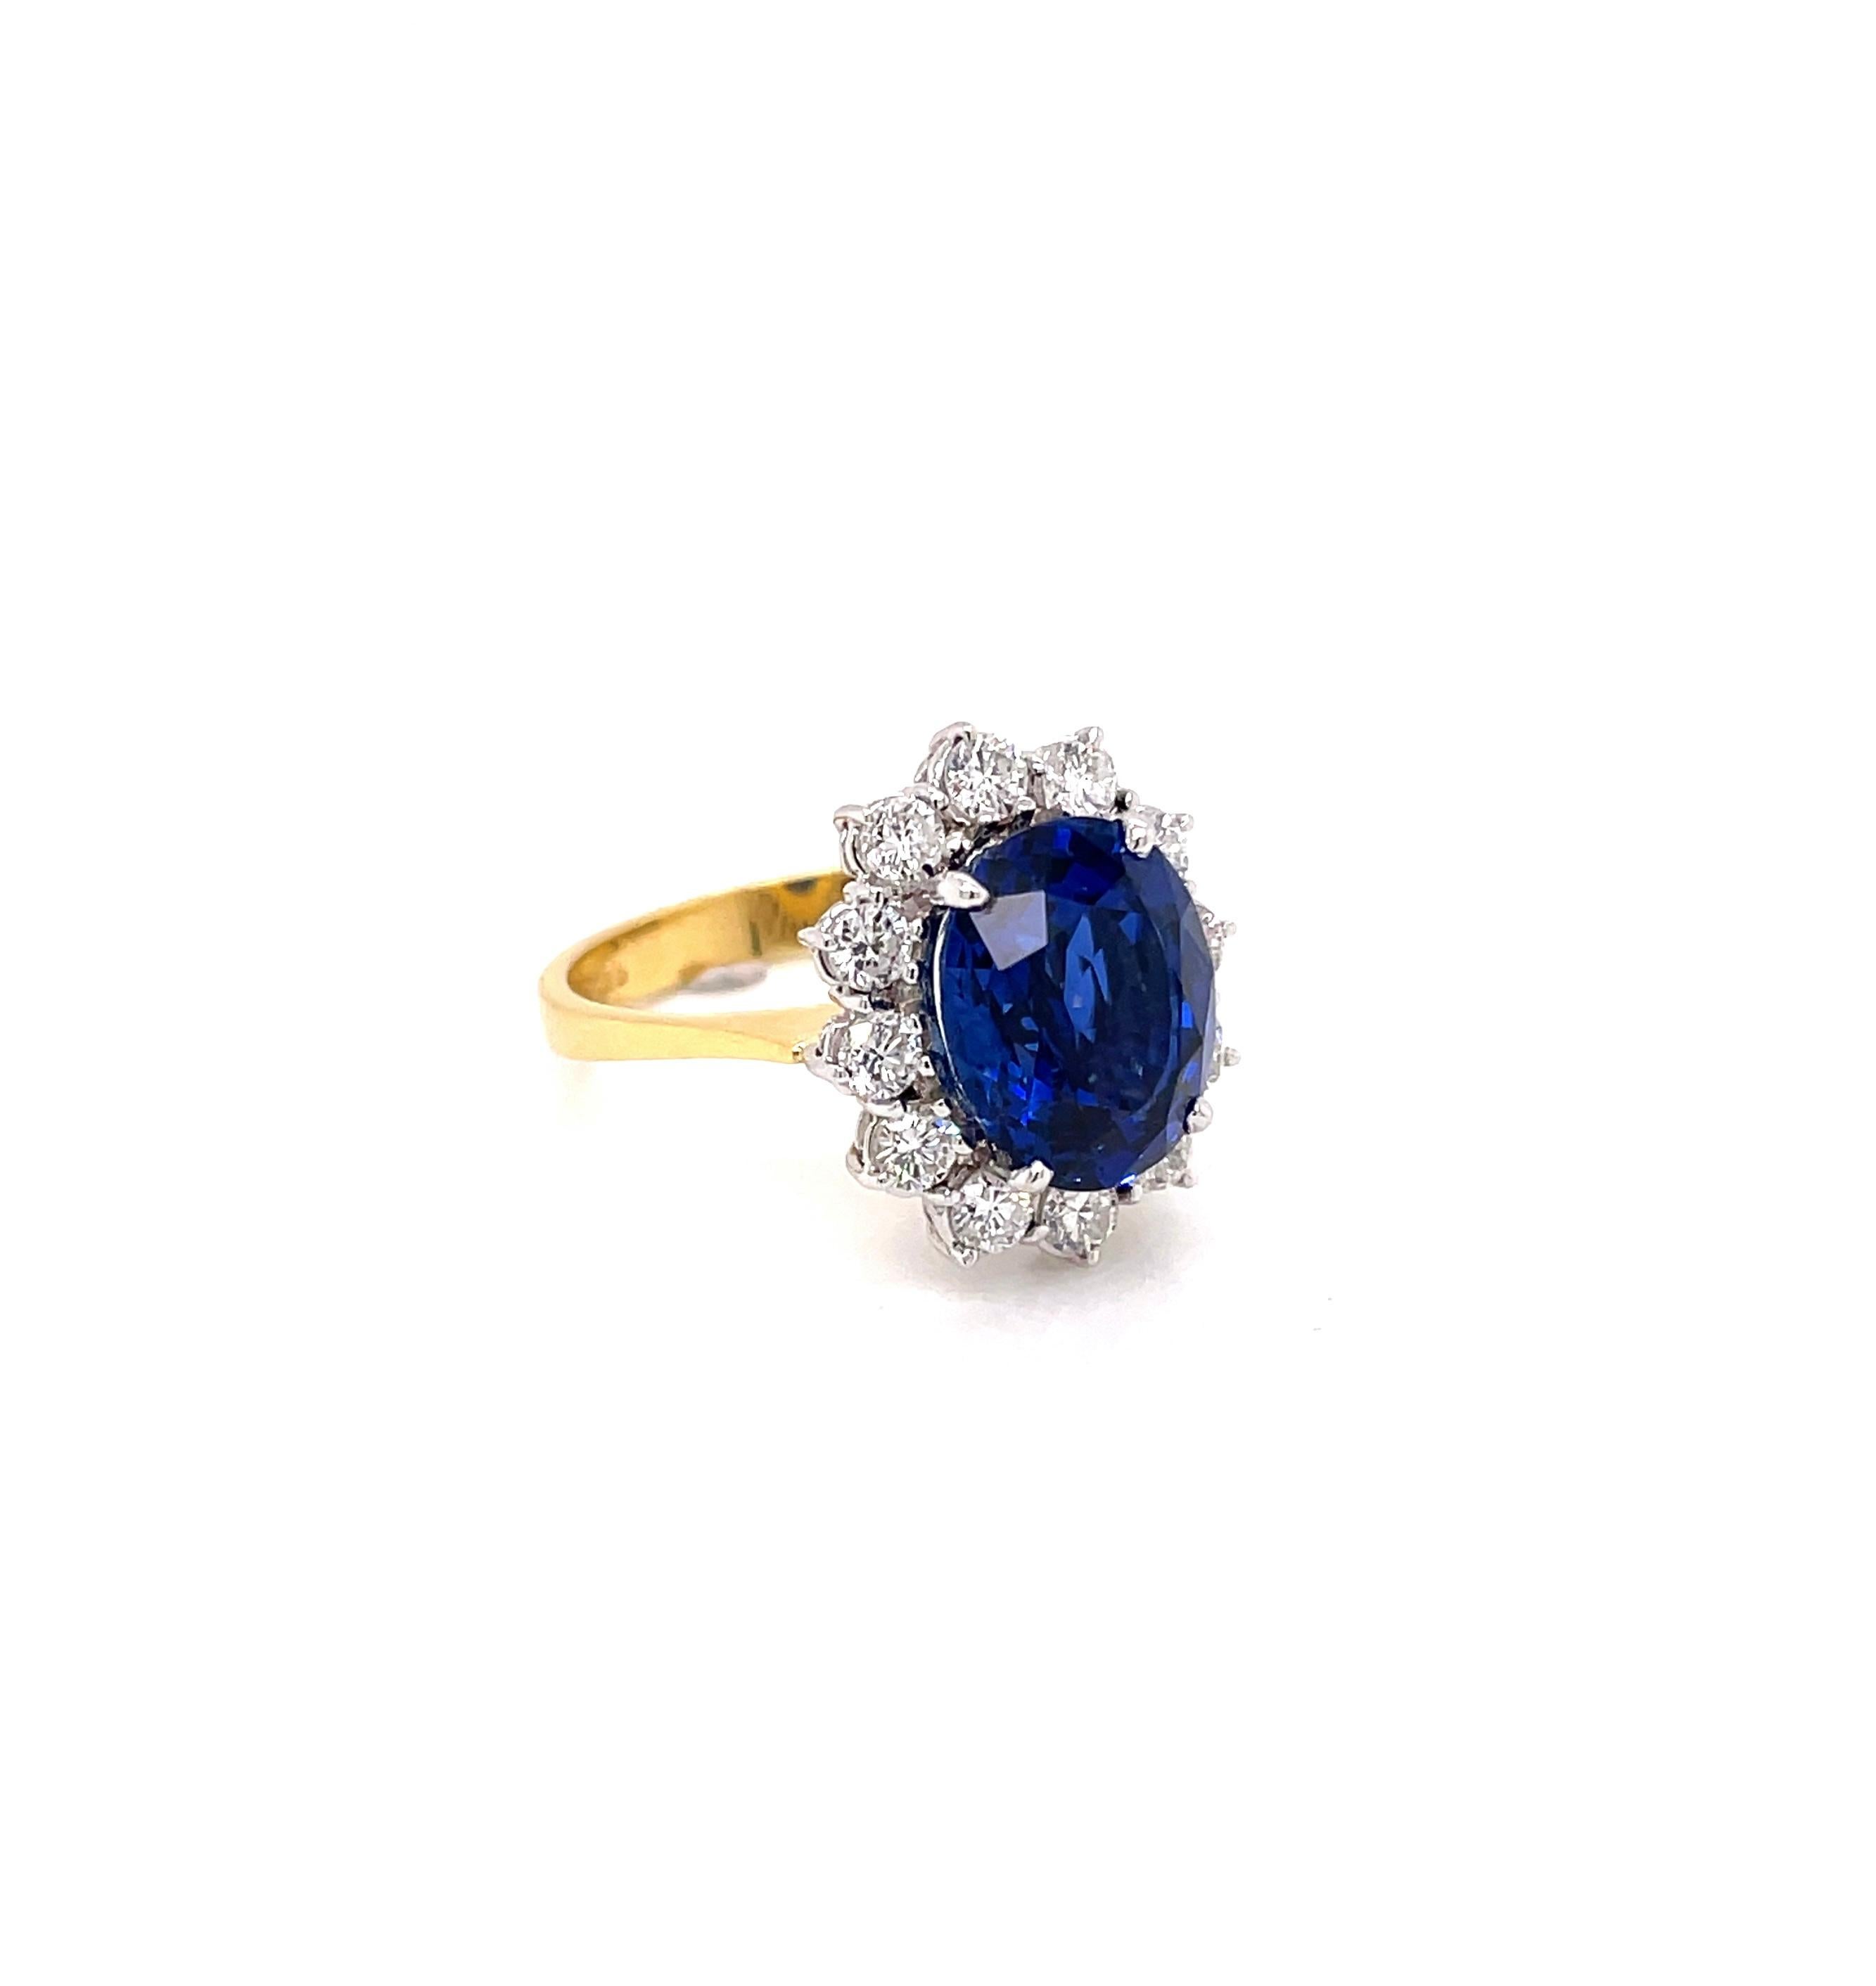 Princess Diana inspired cluster engagement ring set with an exquisite oval shaped royal blue sapphire weighing 5.03 carats in a four claw, open back setting. The gorgeous stone is beautifully surrounded by twelve fine quality round brilliant cut